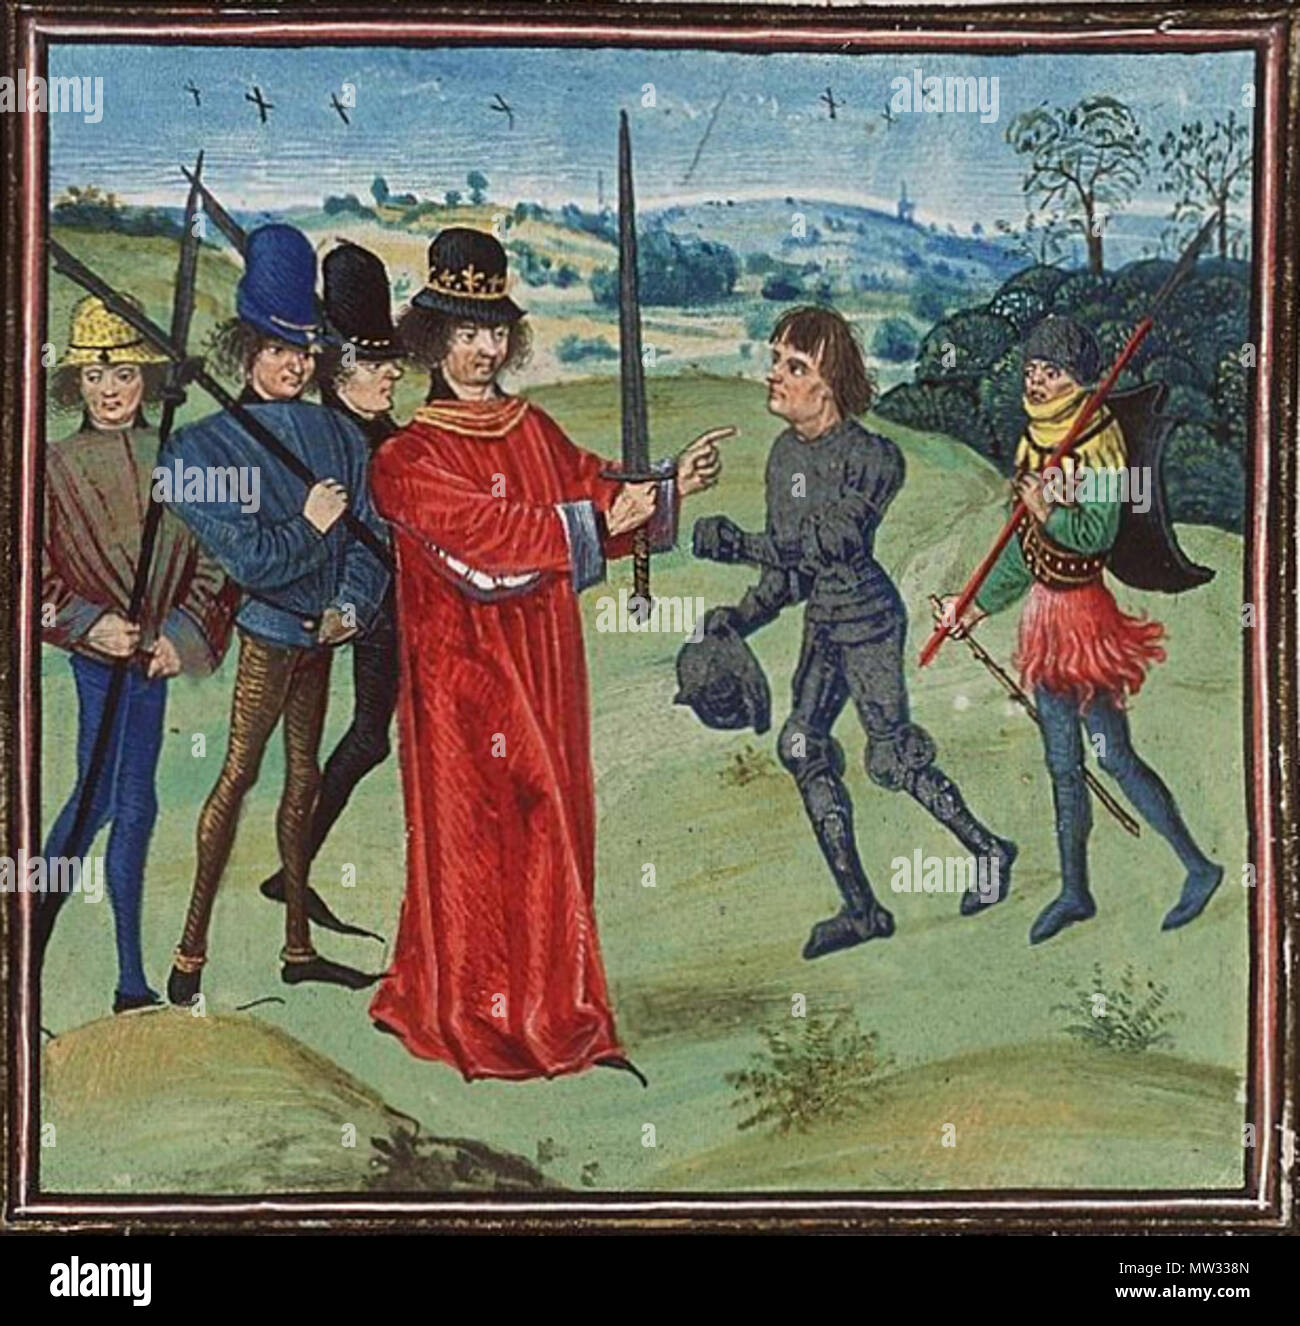 https://c8.alamy.com/comp/MW338N/english-institution-of-baldwin-i-bras-de-fer-the-first-count-of-flanders-by-charles-the-bald-the-frankish-king-contents-aegidius-of-roya-compendium-historiae-universalis-place-of-origin-date-southern-netherlands-dreux-jean-master-of-margaret-of-york-jean-hennecart-illuminators-c-1450-1460-material-vellum-ff-296-362x256-232x159-mm-35-lines-littera-hybrida-binding-17th-century-vellum-blind-decoration-3-two-column-miniatures-180160x155-mm-10-column-miniatures-8068x7067-mm-1-illustration-in-the-margin-decorated-initials-with-border-decoration-ff-1r-ir-ii-MW338N.jpg